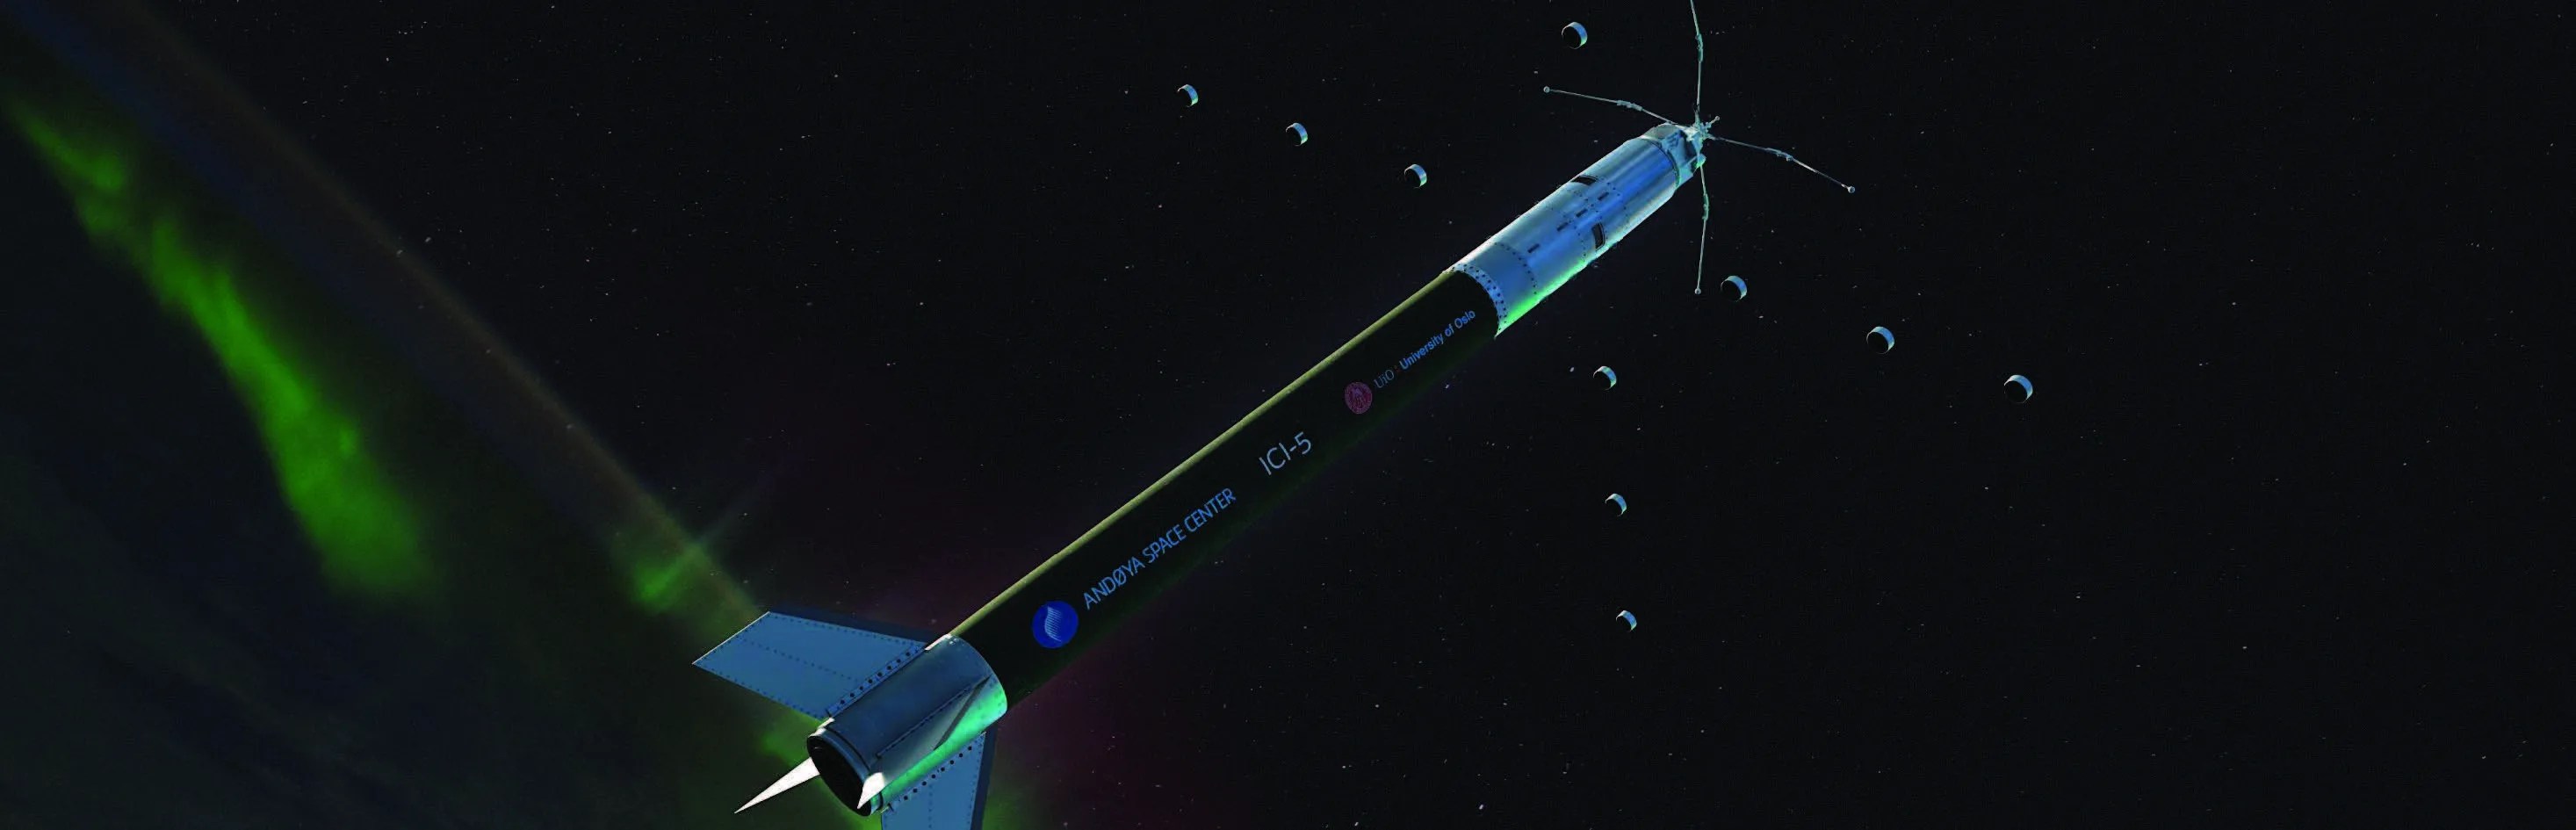 Artist rendition of a sounding rocket in space